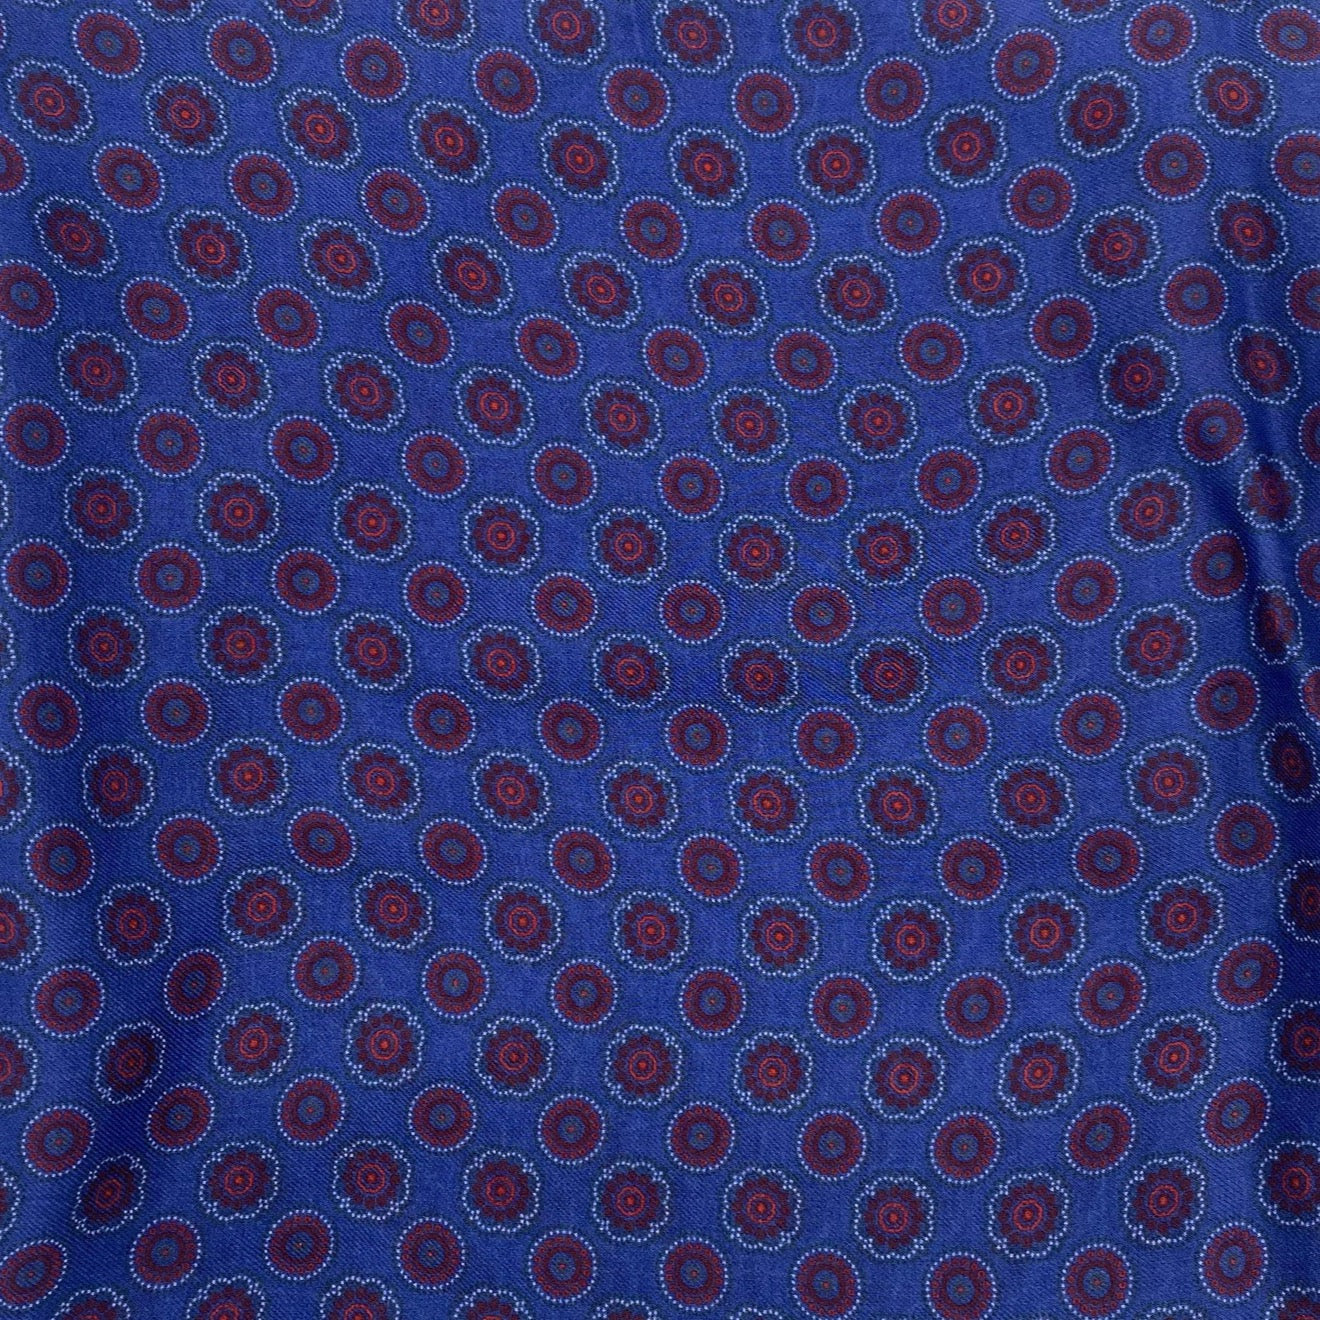 A flat, folded view of 'The Bellevue' boho wide scarf on a blue background. Clearly showing the circular red patterns and floral inspired patterns.